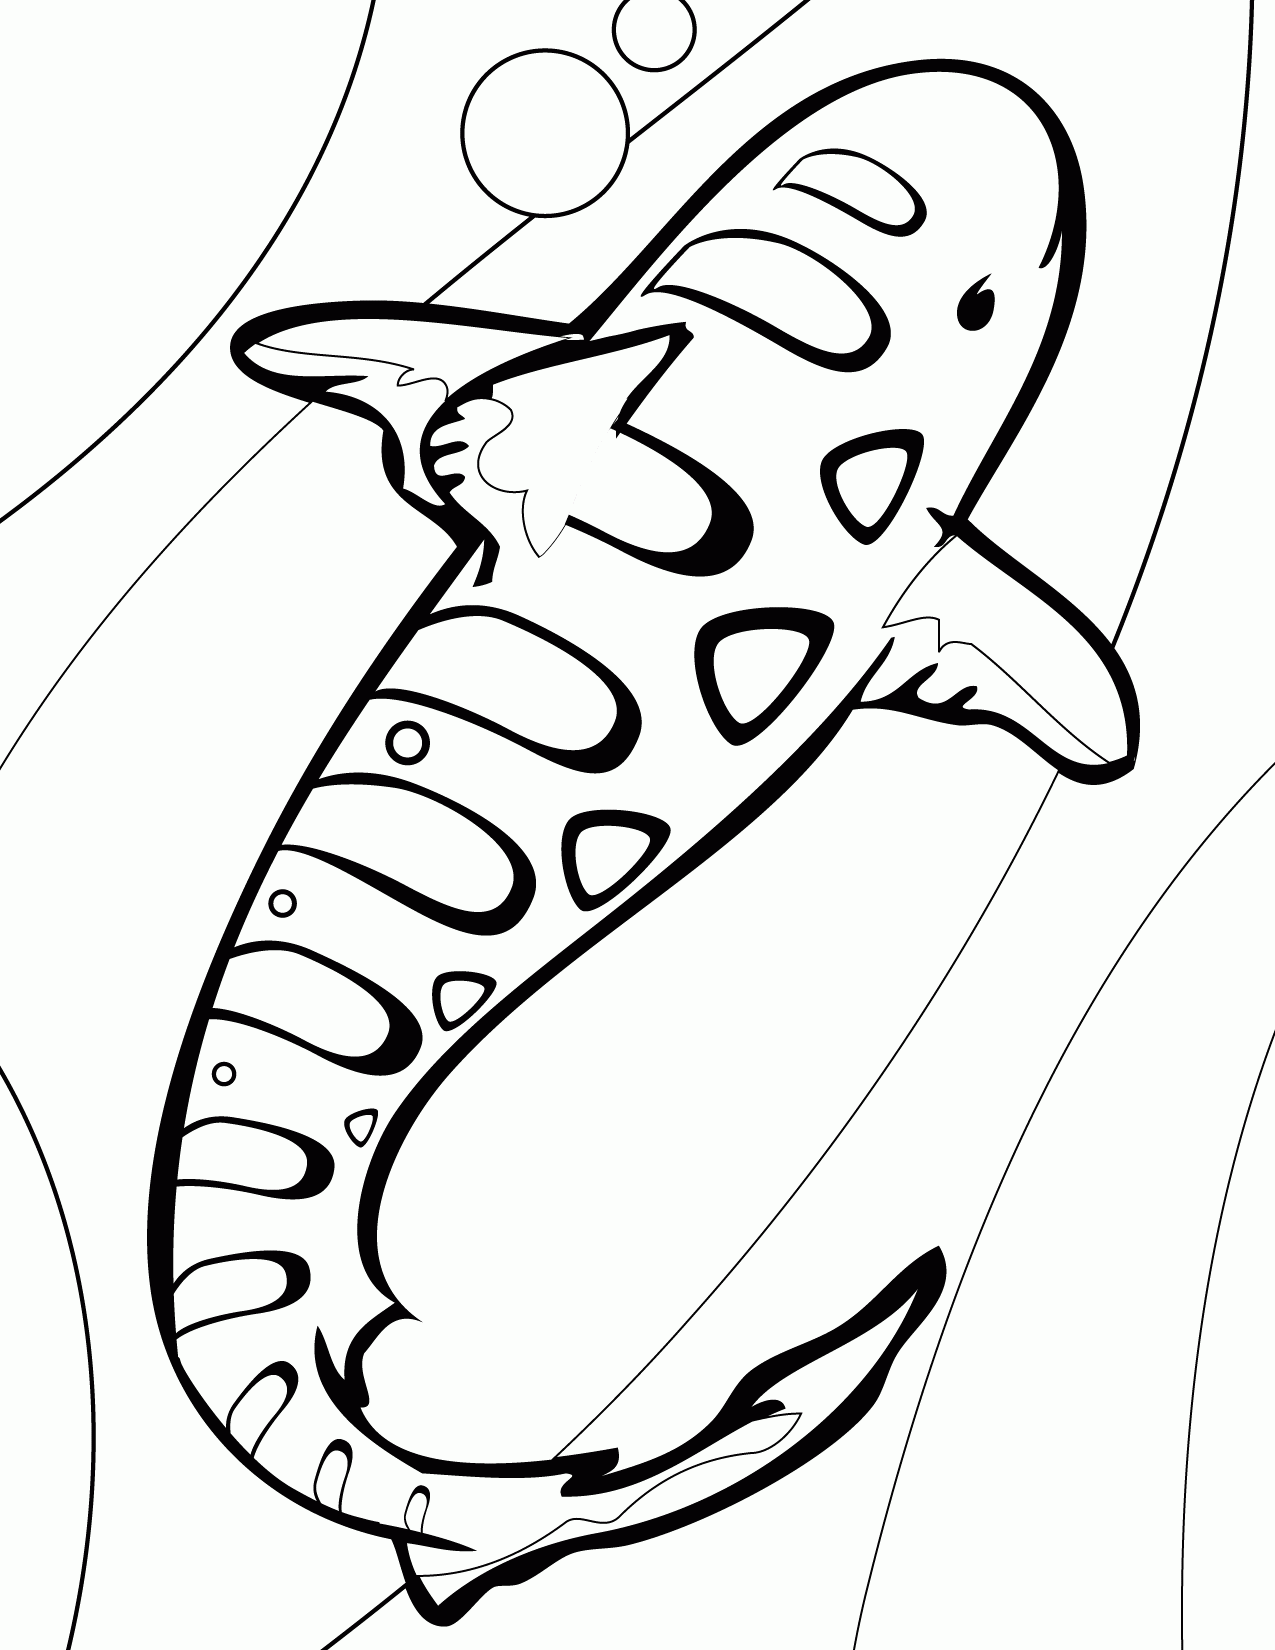 Free Shark Coloring Pages To Print - Coloring Home